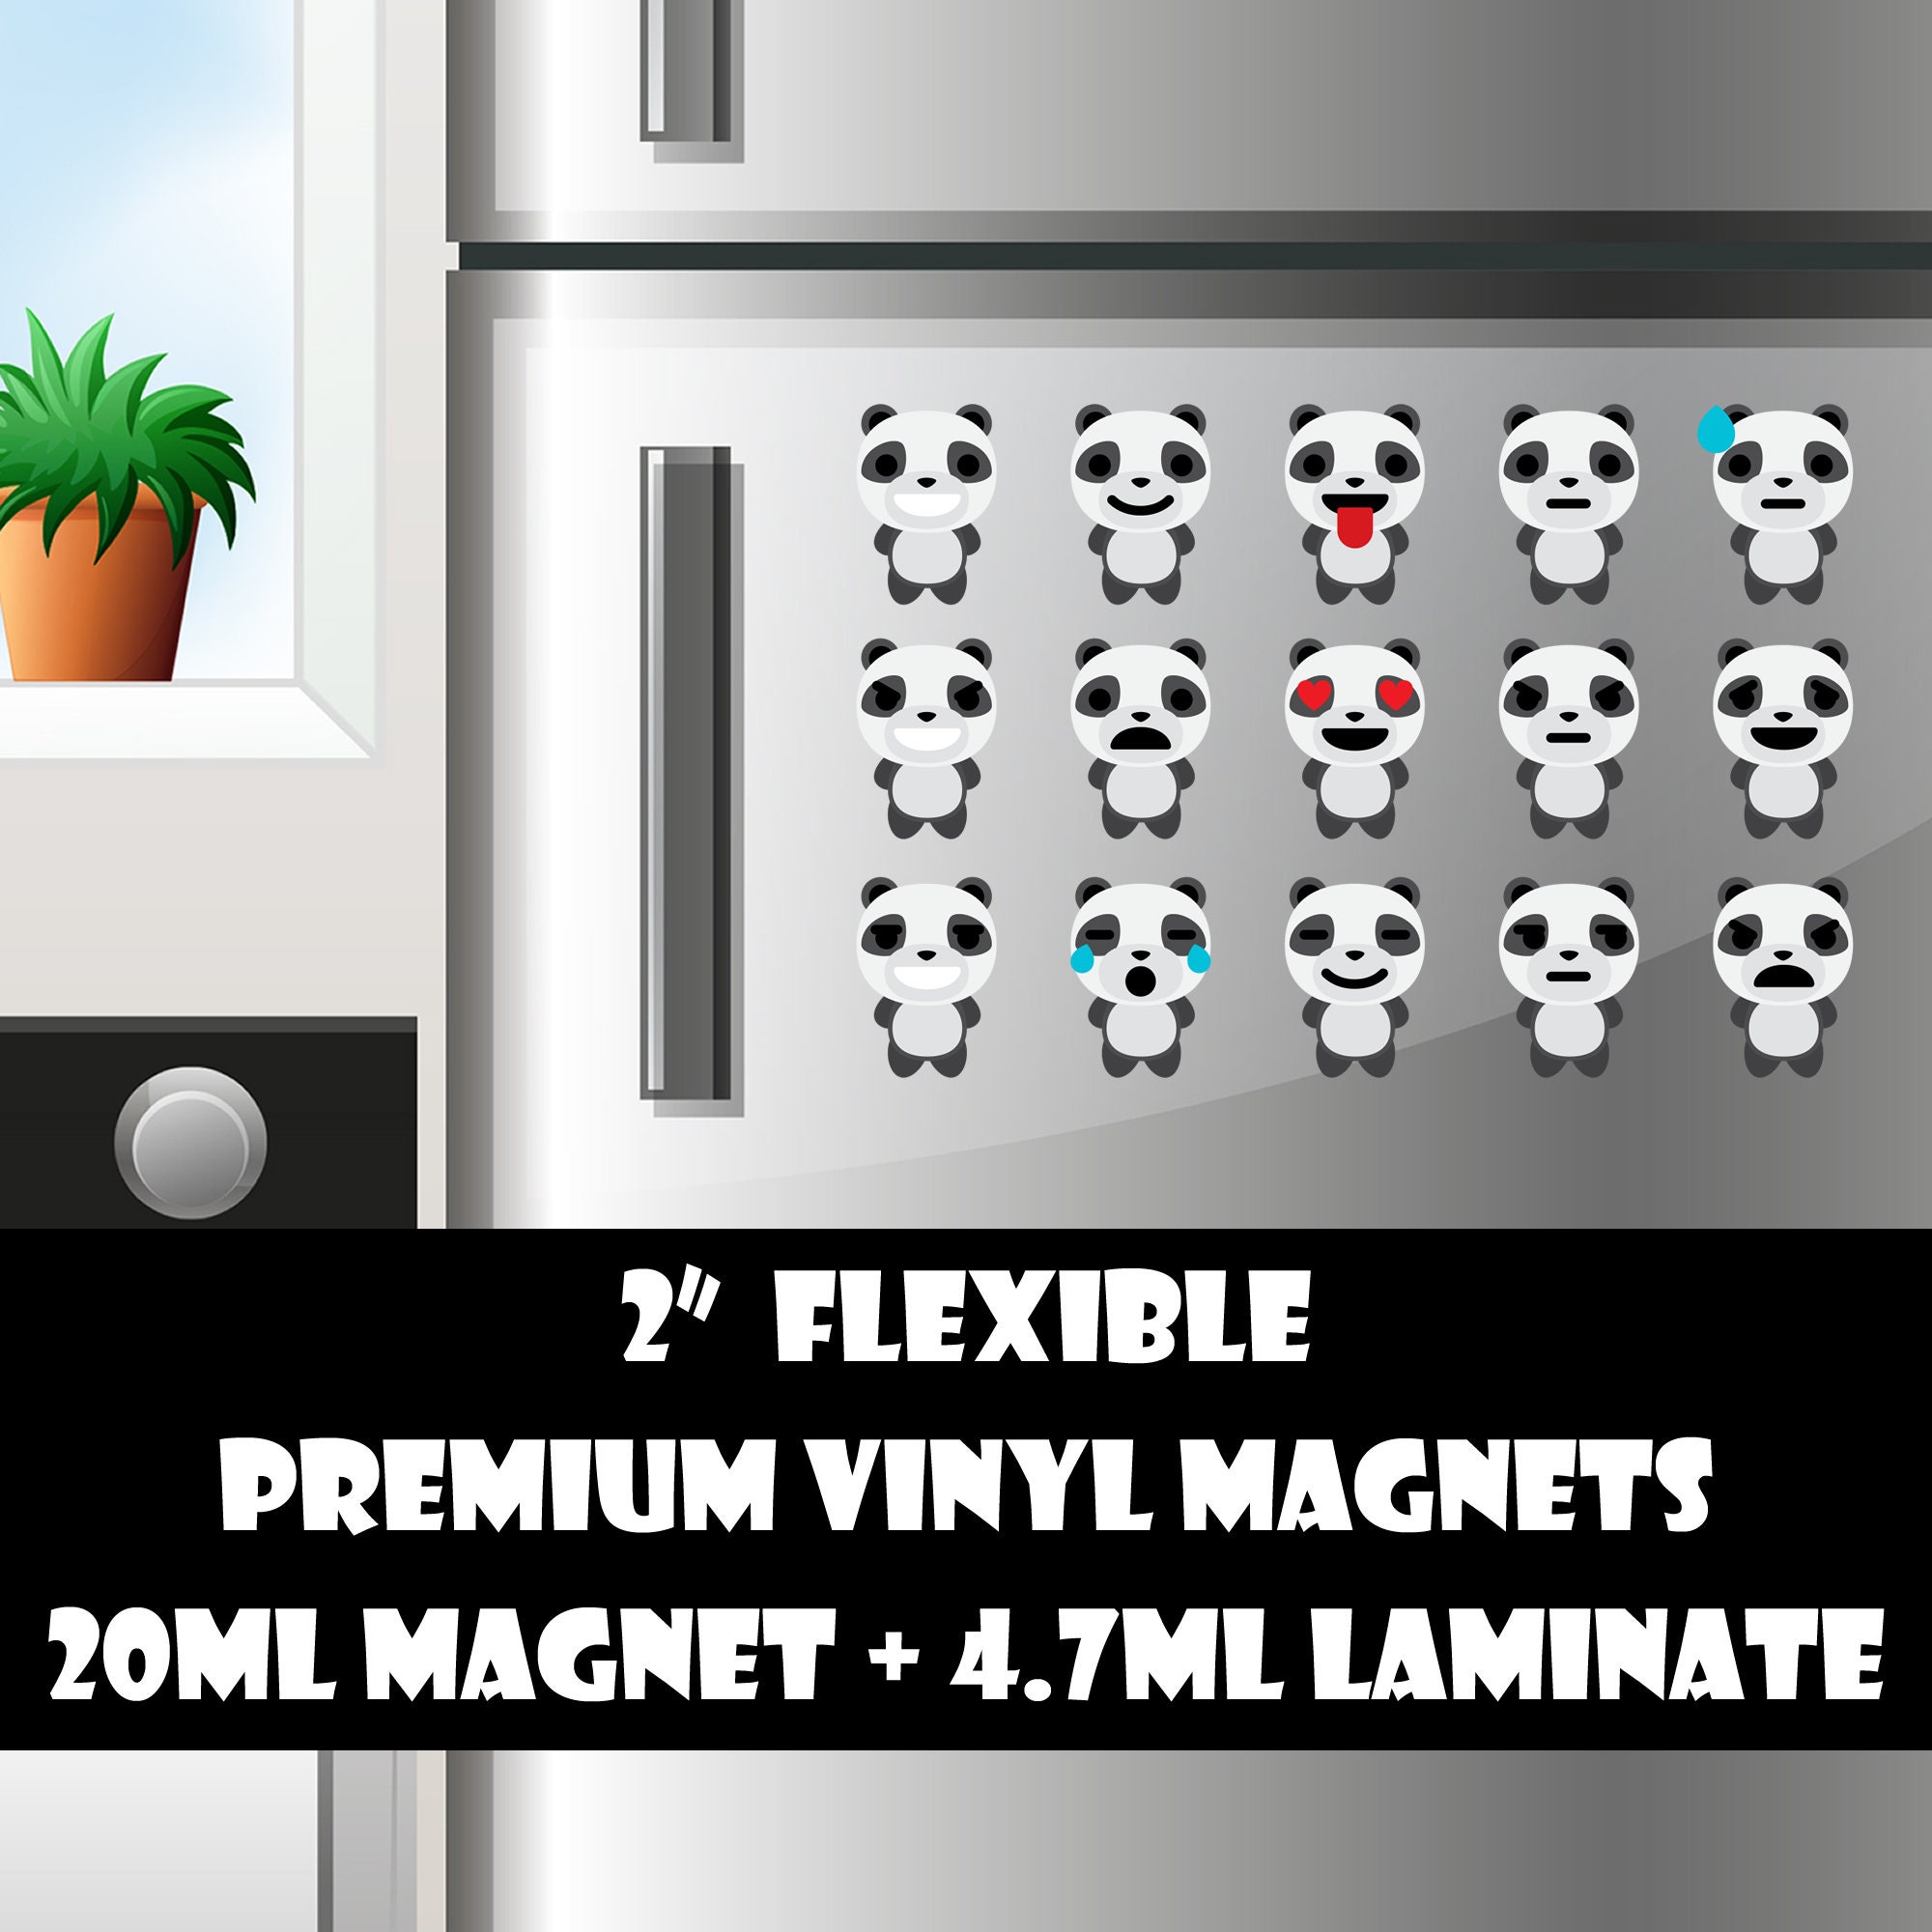 15 2inch panda emoji fridge magnets or stickers standard, photo or vinyl print materials with laminate or magnet options available.